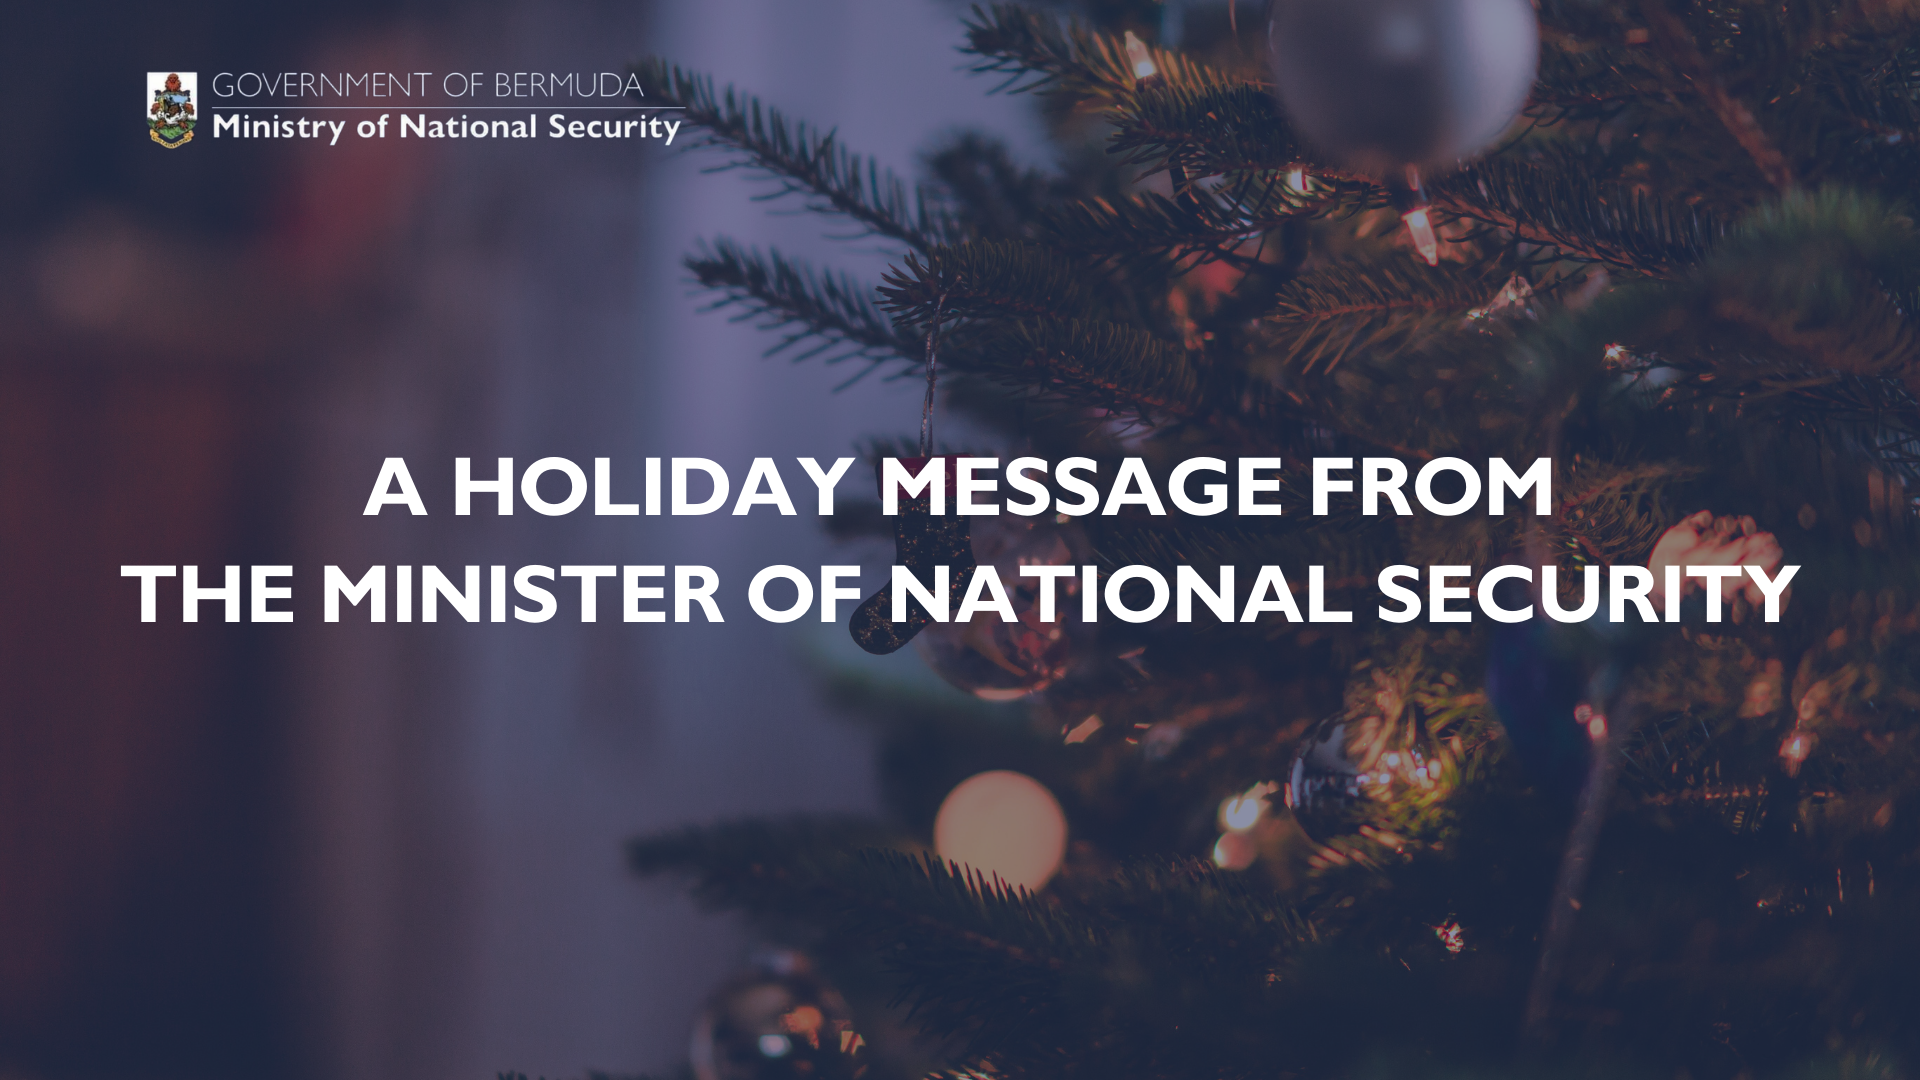 A message from the Minister of National Security